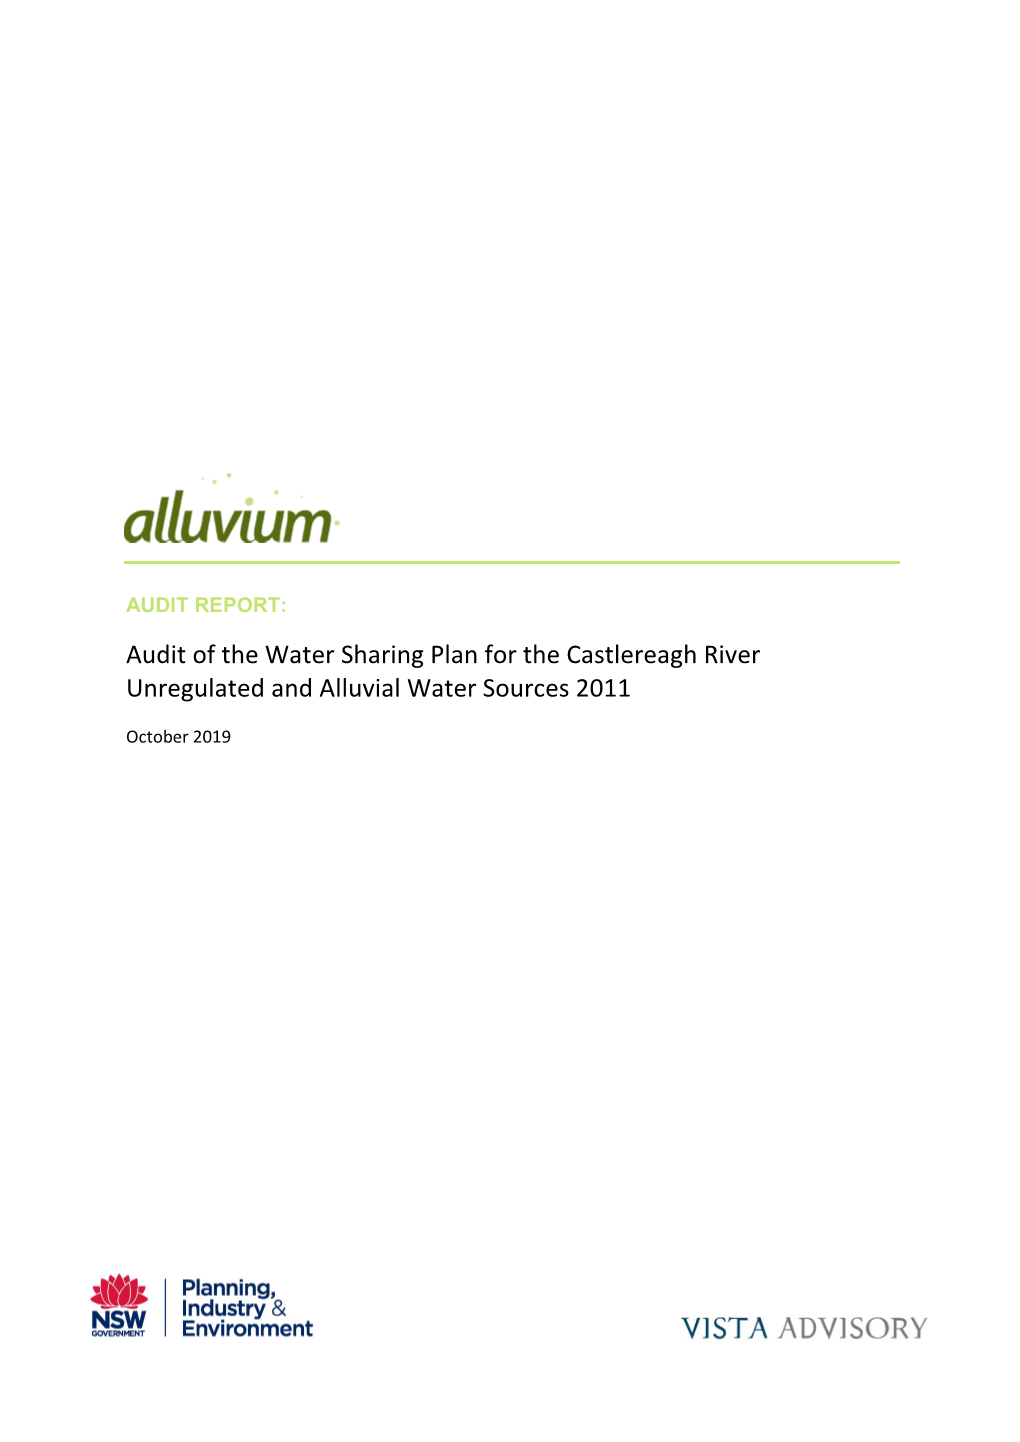 Castlereagh River Unregulated and Alluvial Water Sources 2011